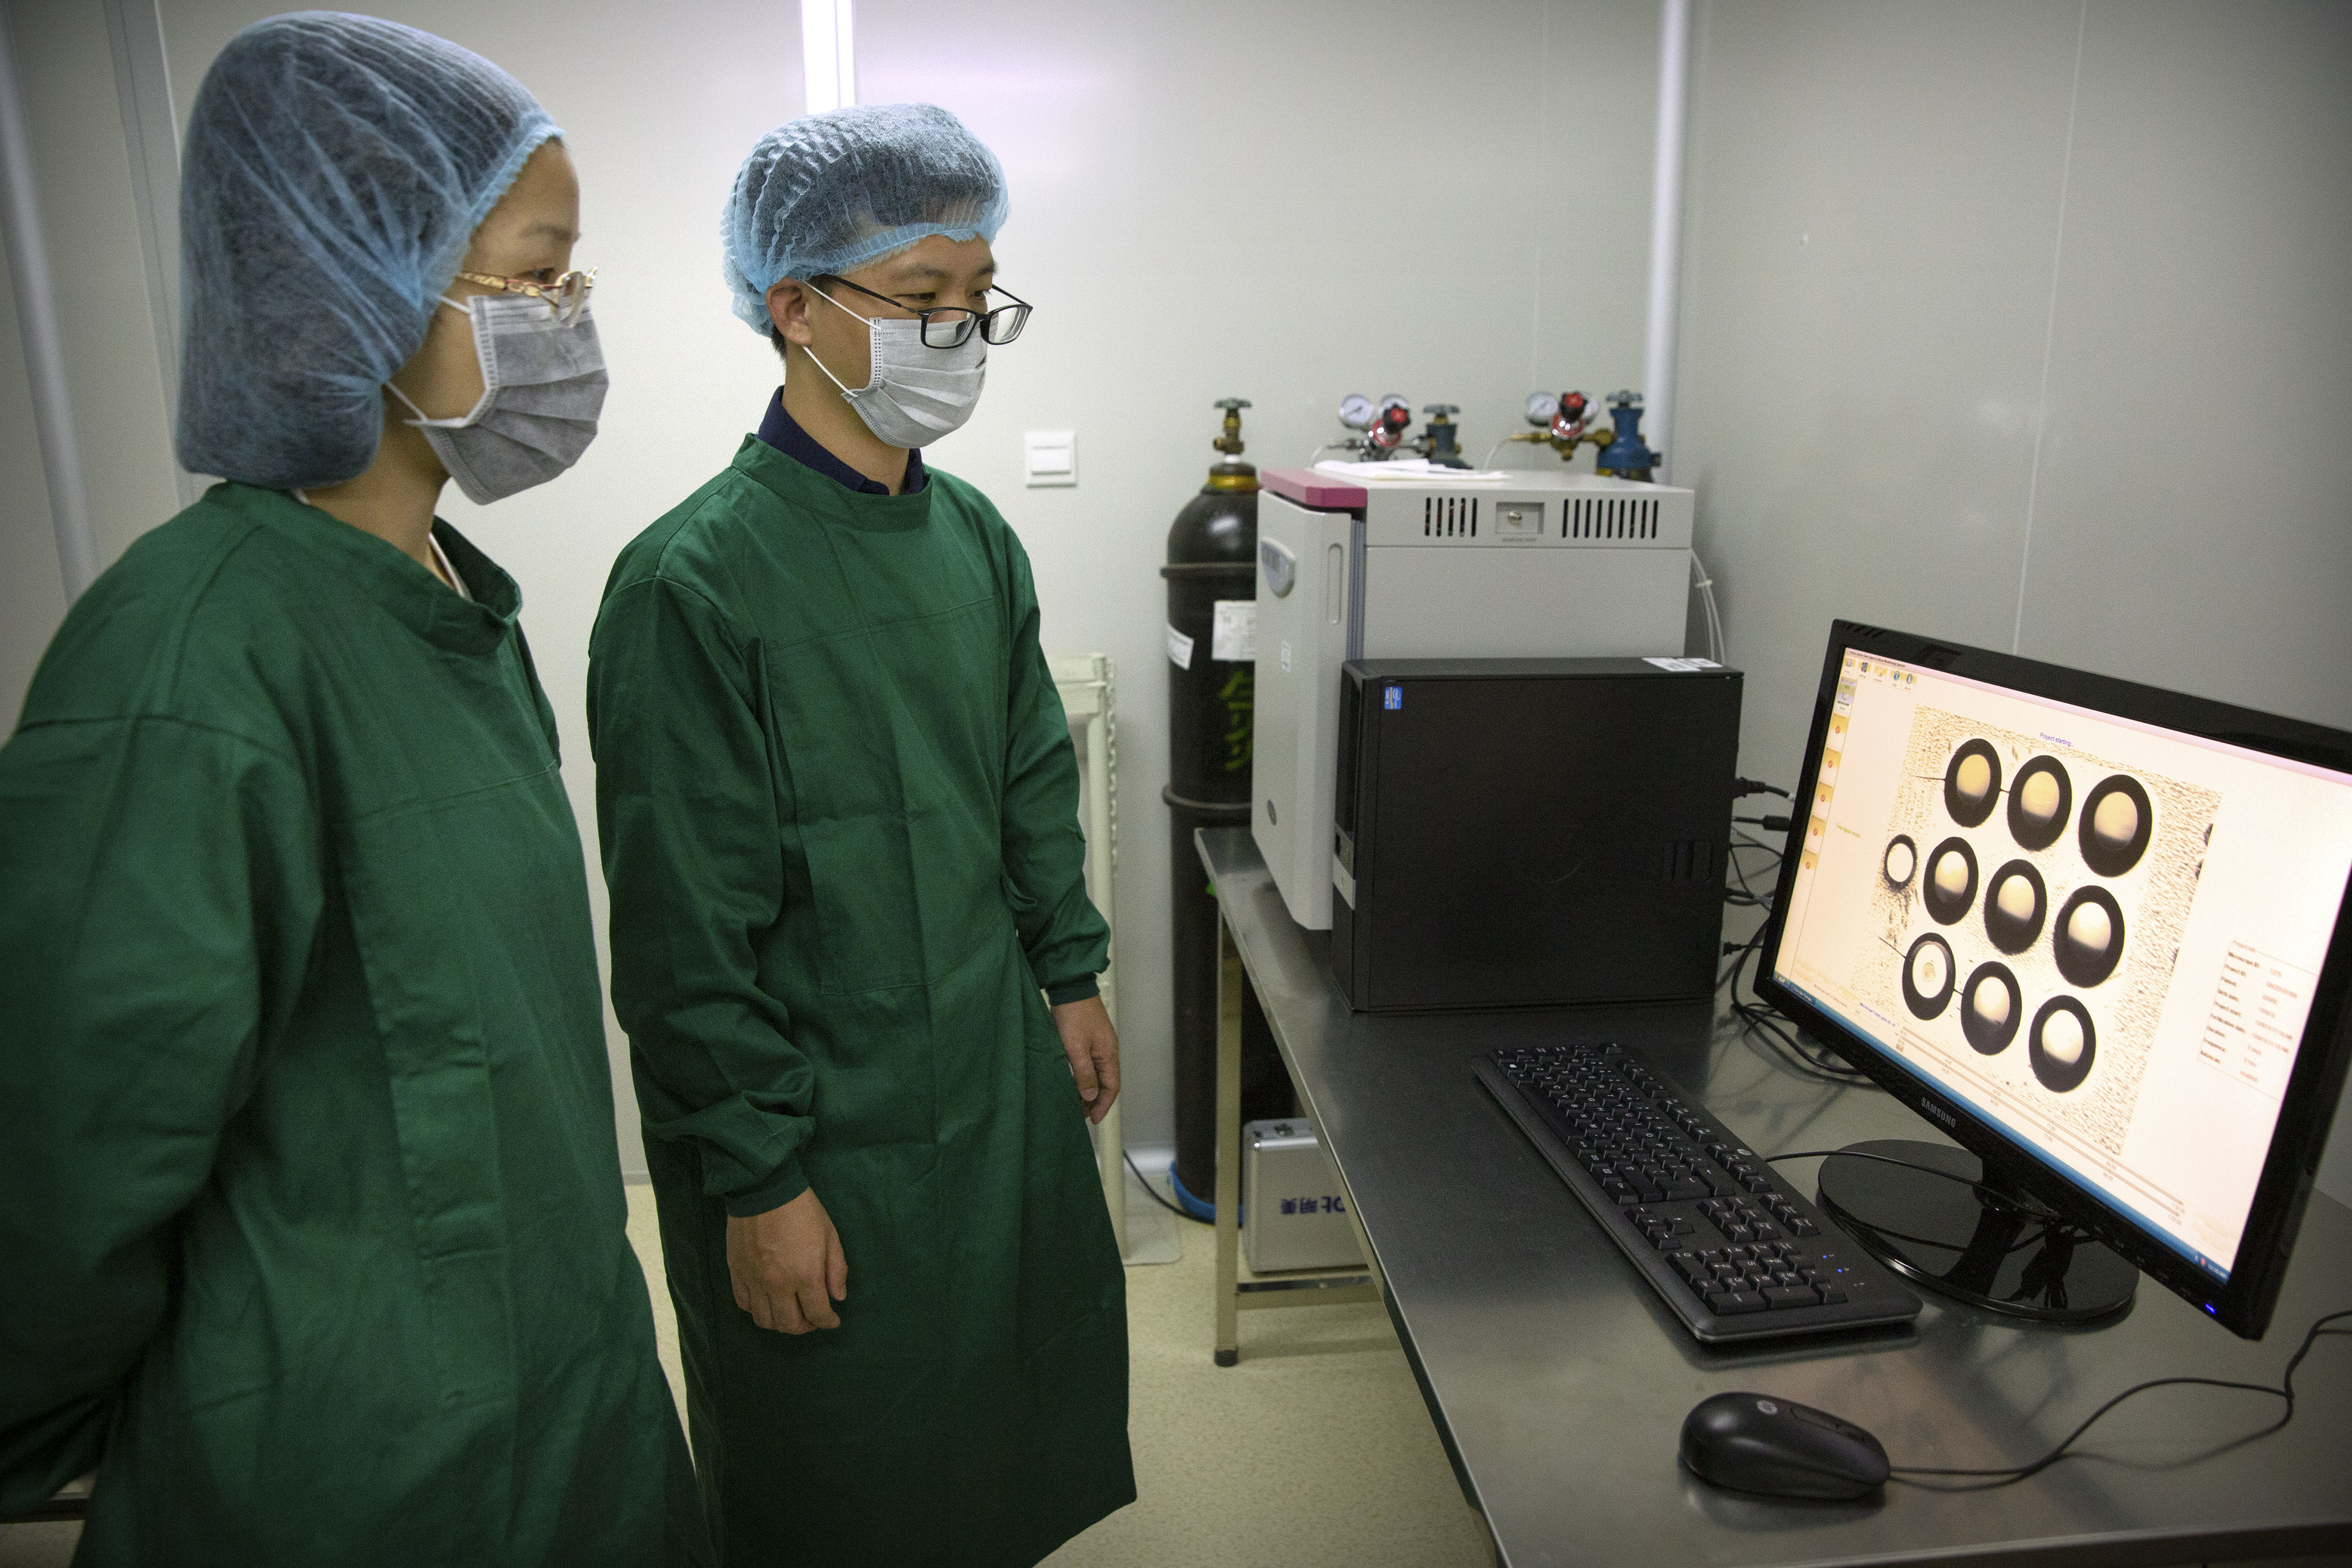 Zhou Xiaoqin, left, and Qin Jinzhou, an embryologist, who were part of the team working with scientist He Jiankui, view a time lapse image of embryos on a computer screen at a lab in Shenzhen